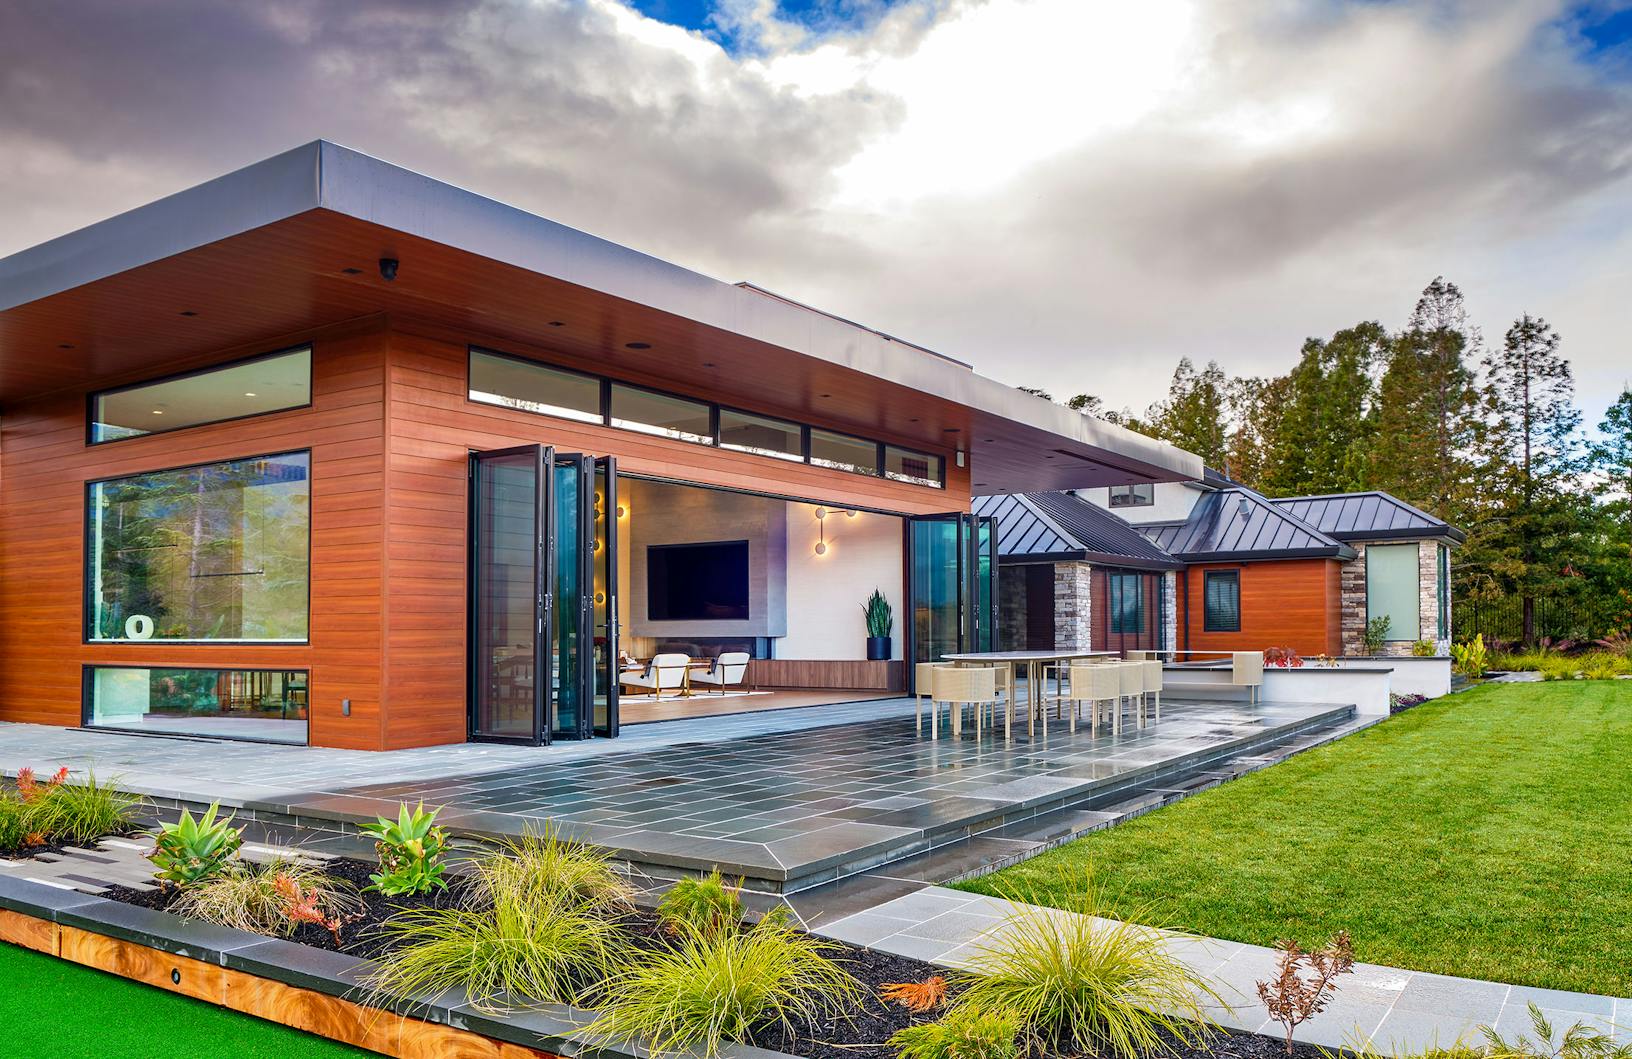 Contemporary house with Generation 4 bifold glass walls embracing a green lawn